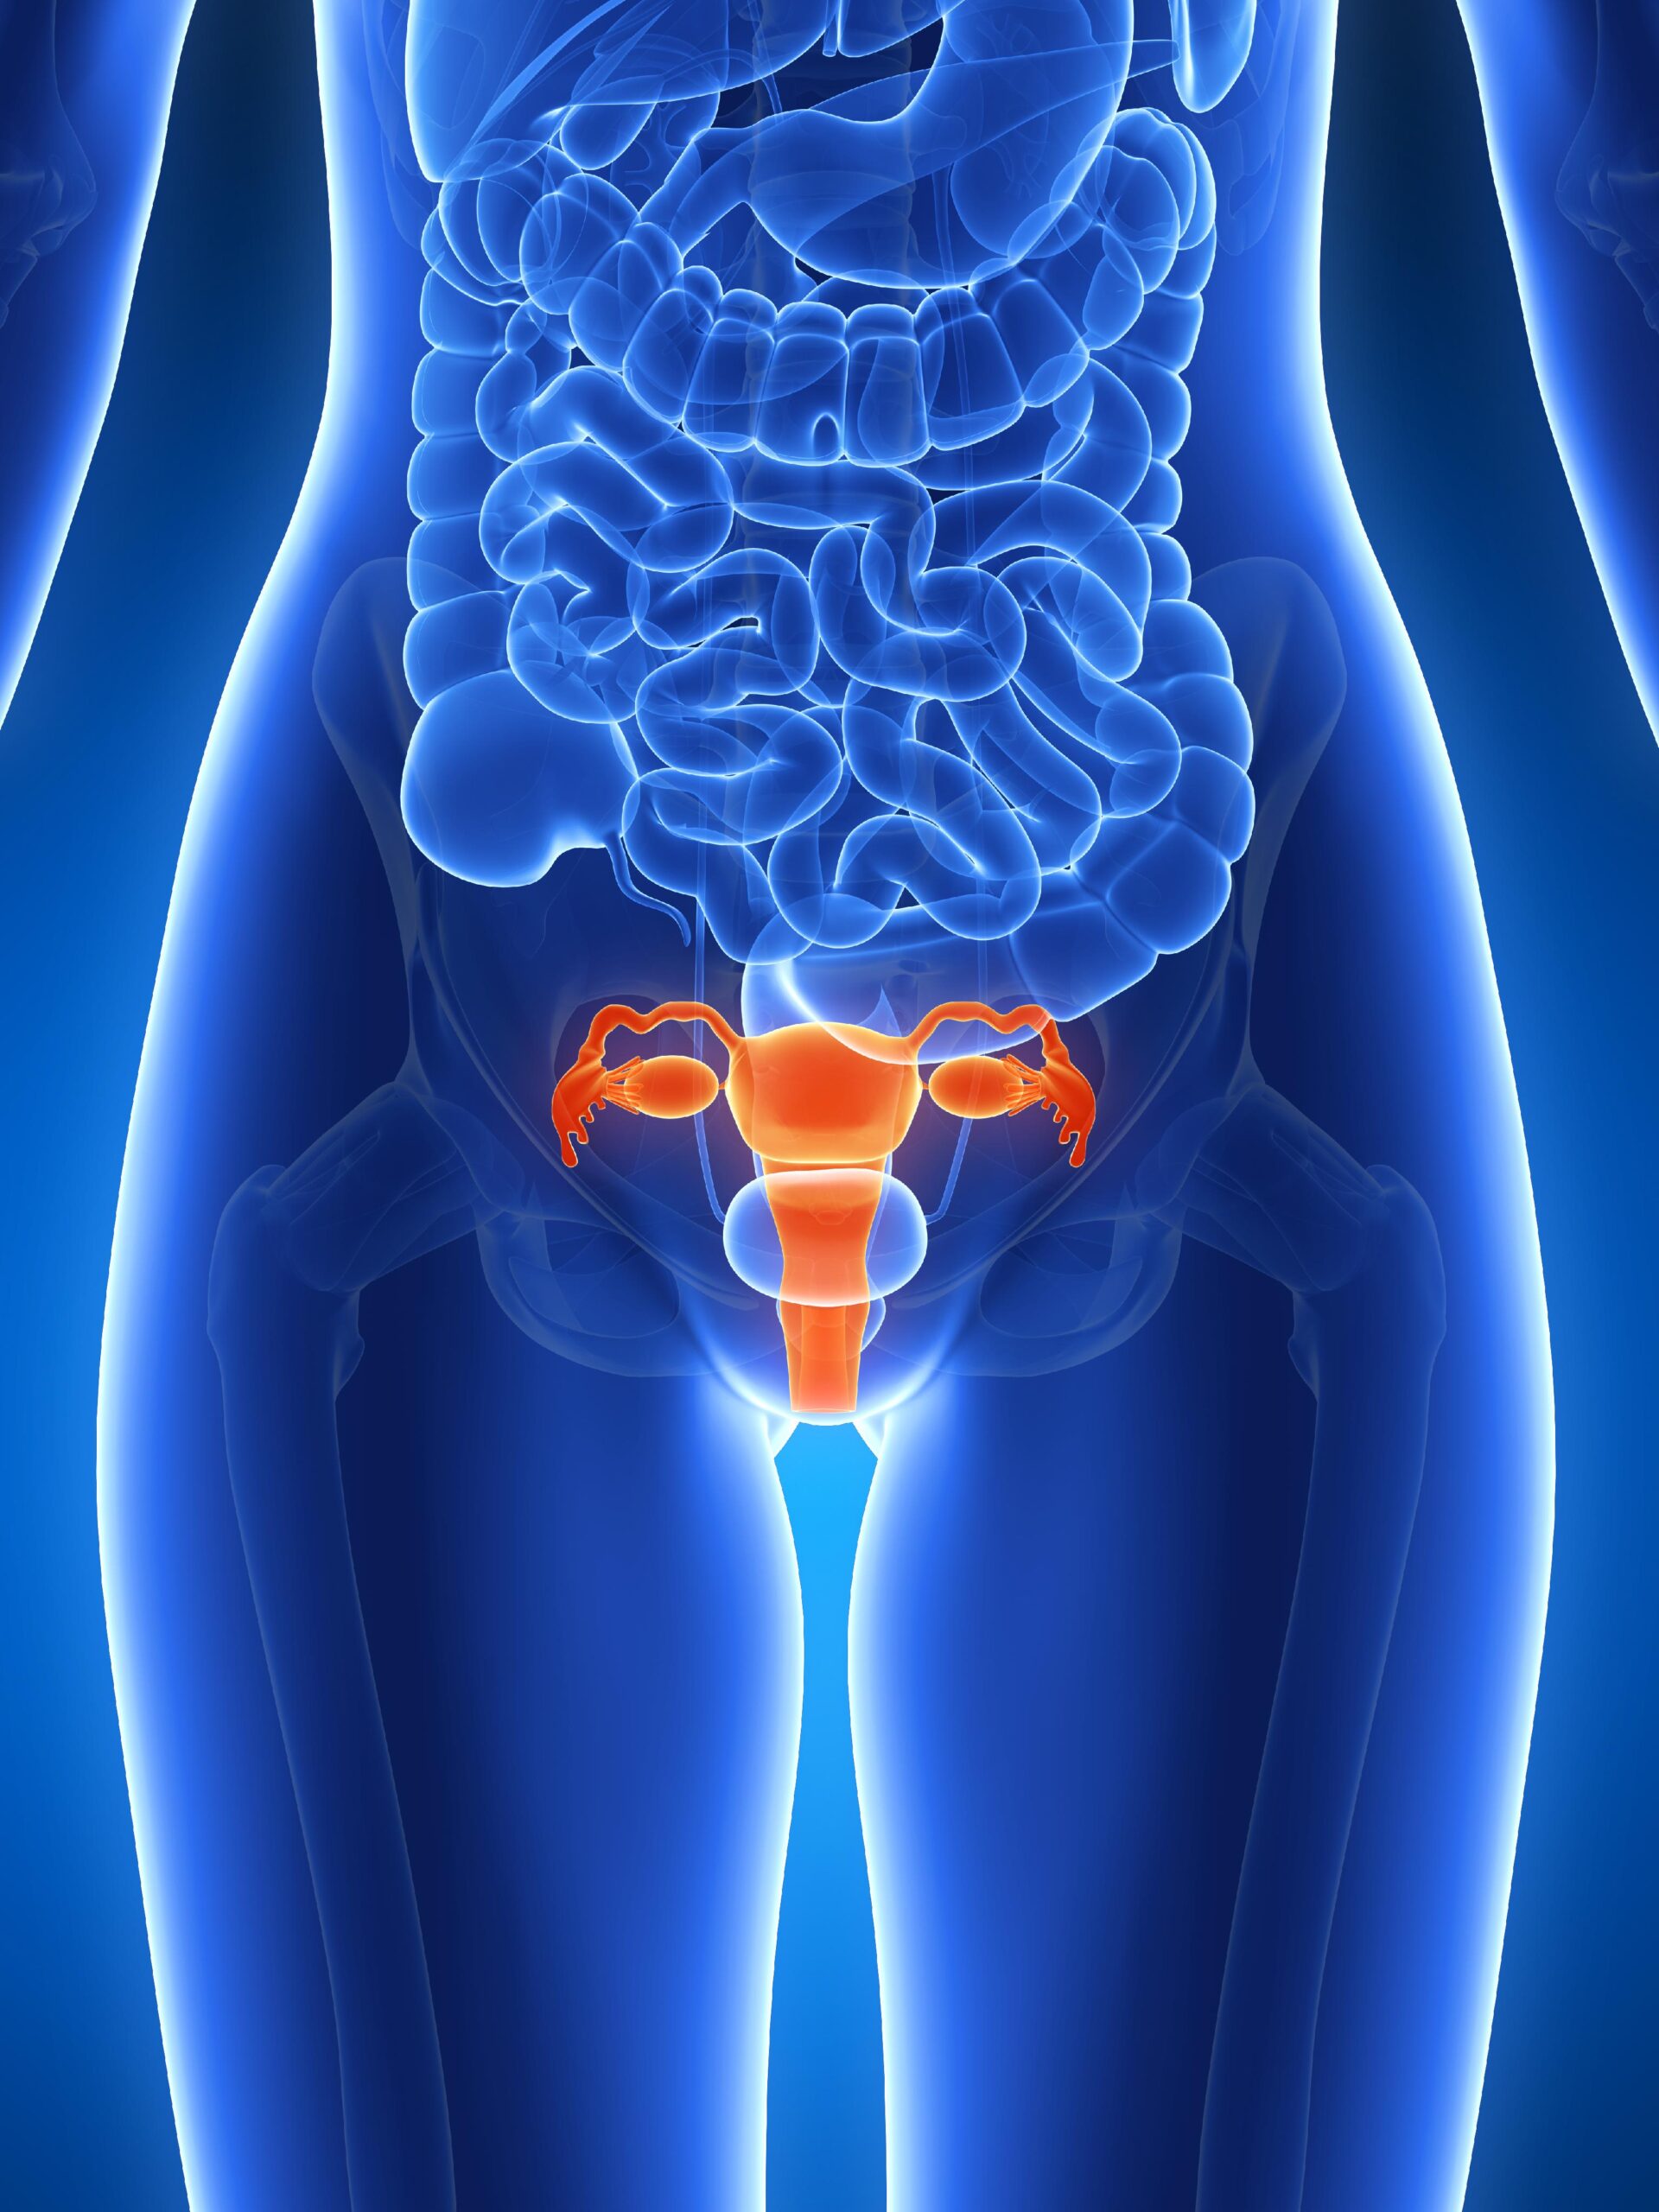 Treatments Of Uterine Cancer​